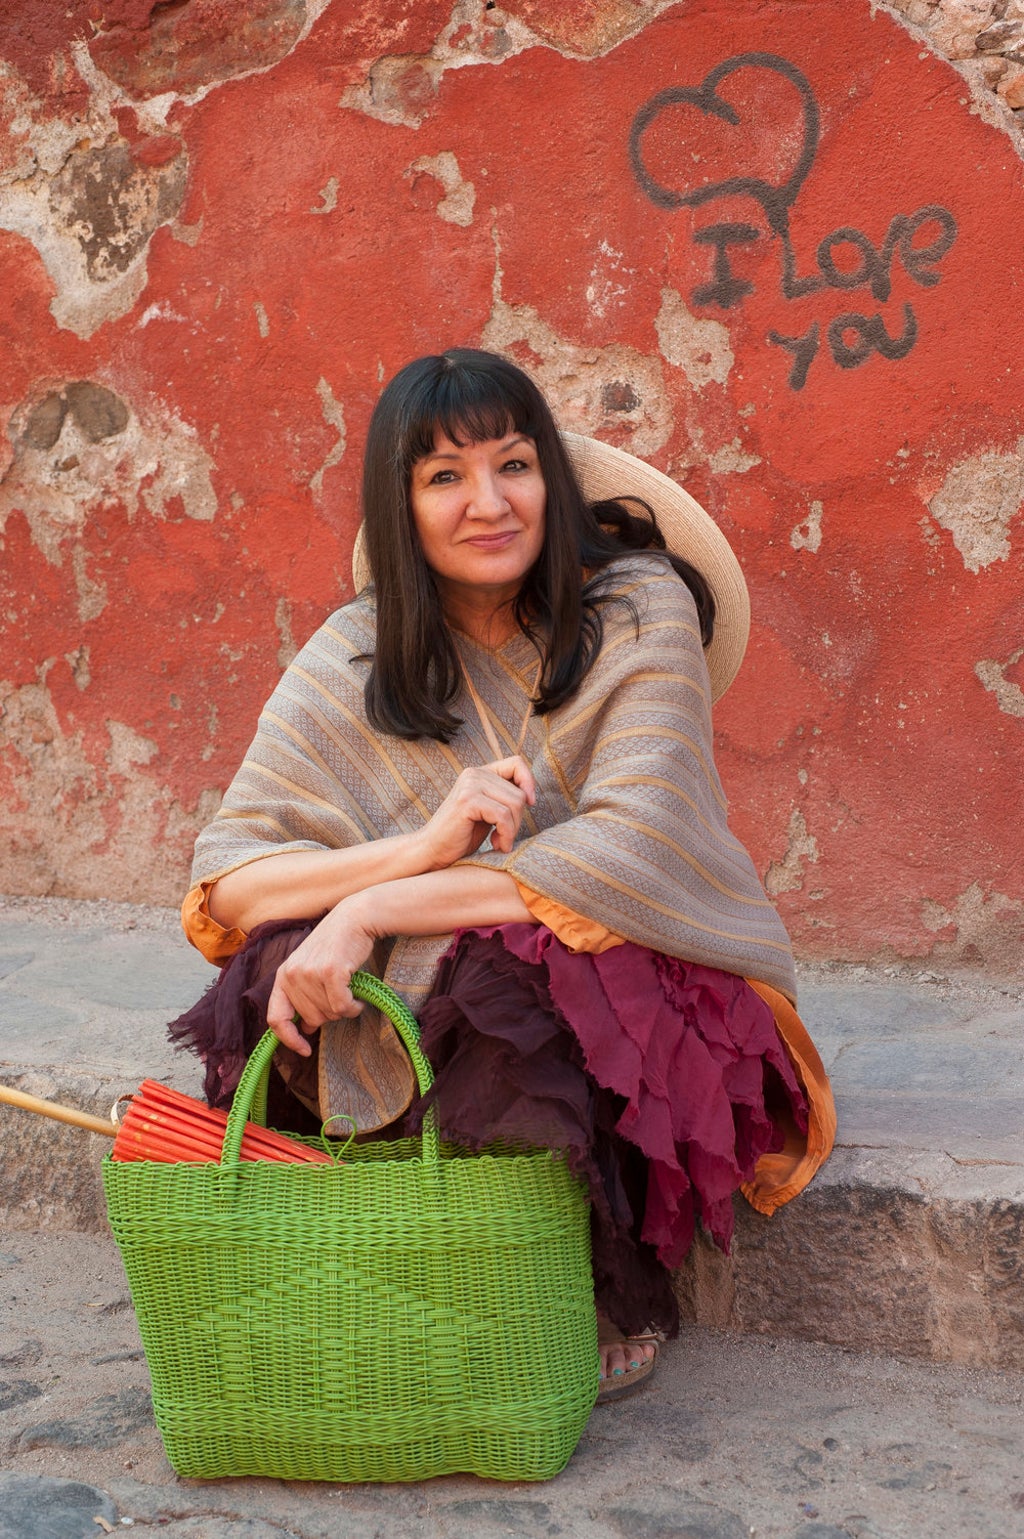 Ten books by Latino authors you should be reading, according to Sandra Cisneros